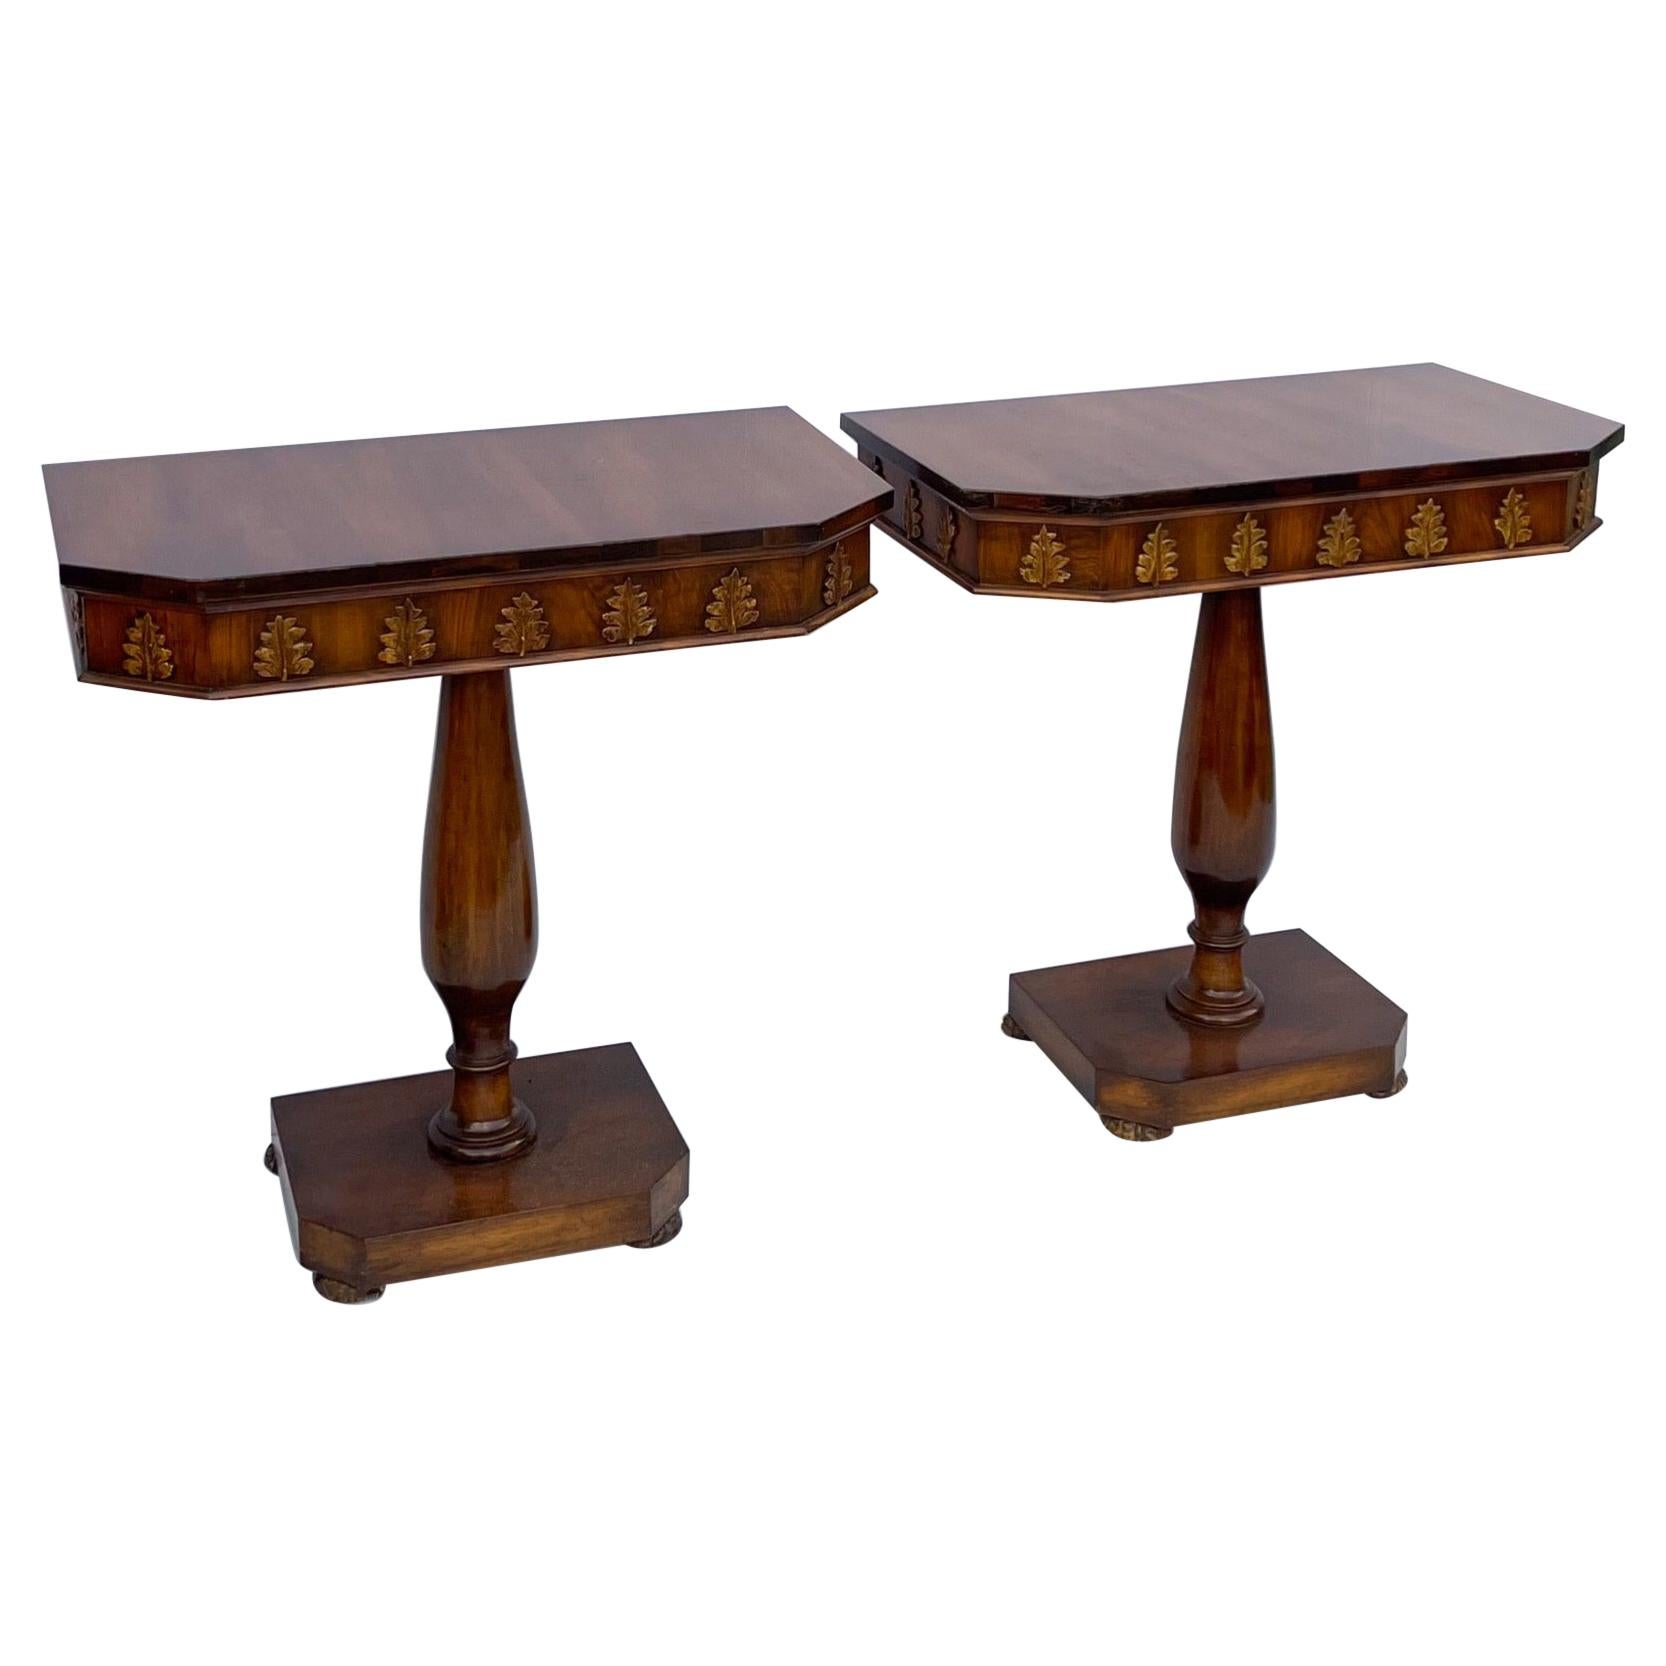 1940s Regency Style Carved Walnut and Gilt Console Tables, Pair